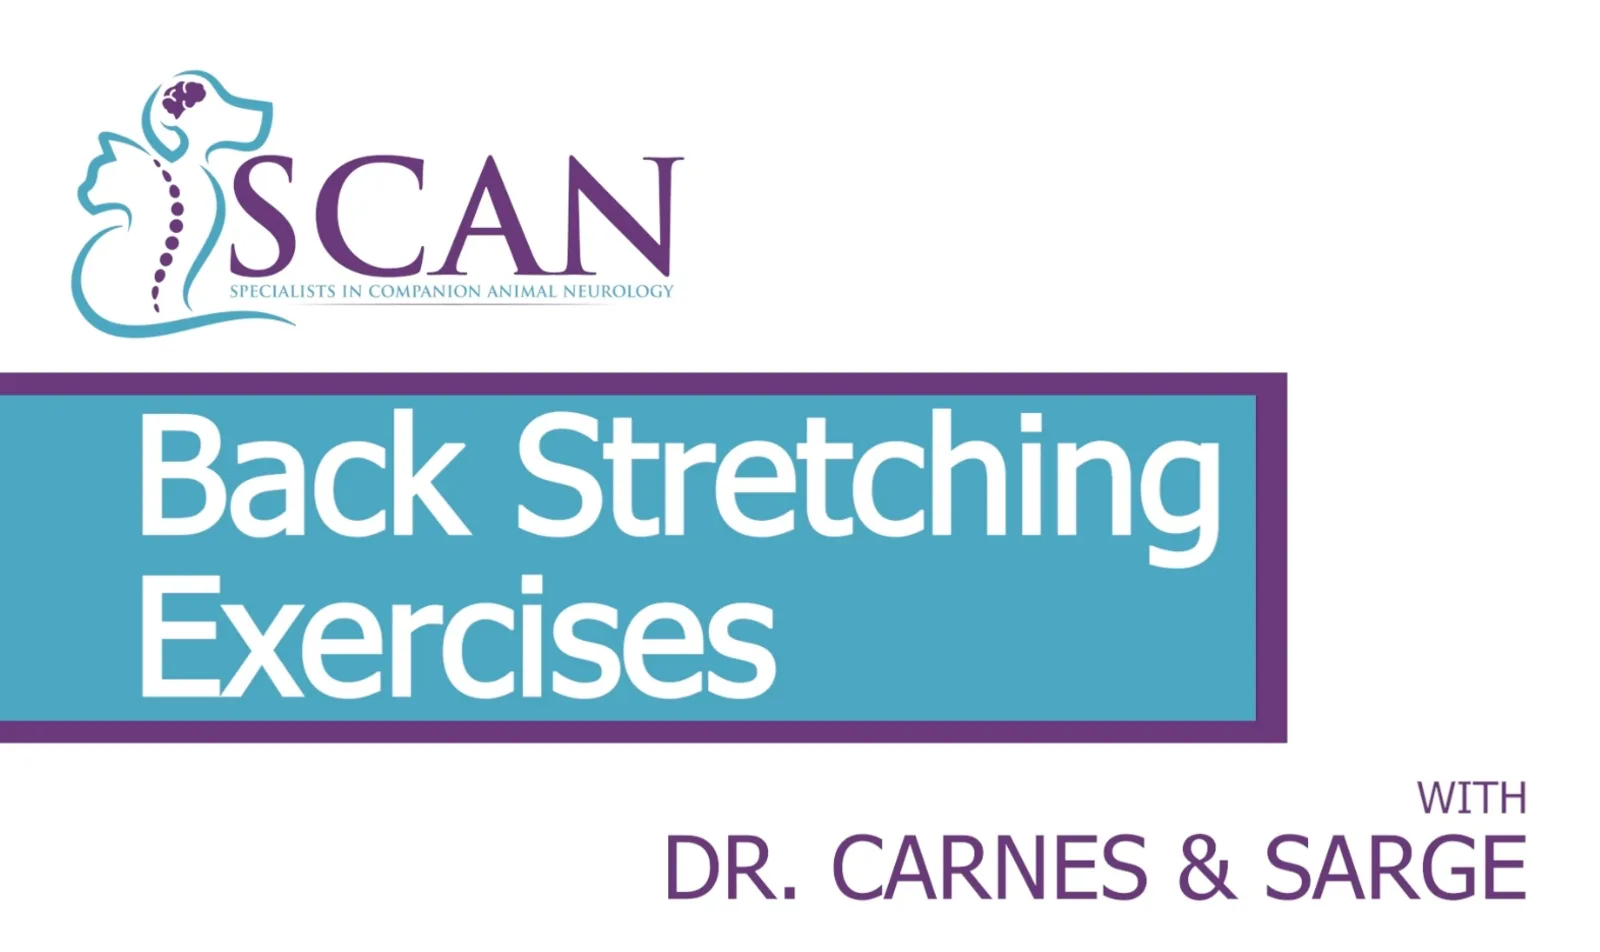 SCAN's Dr. Carnes demonstrates Back Stretching Exercises with Sarge